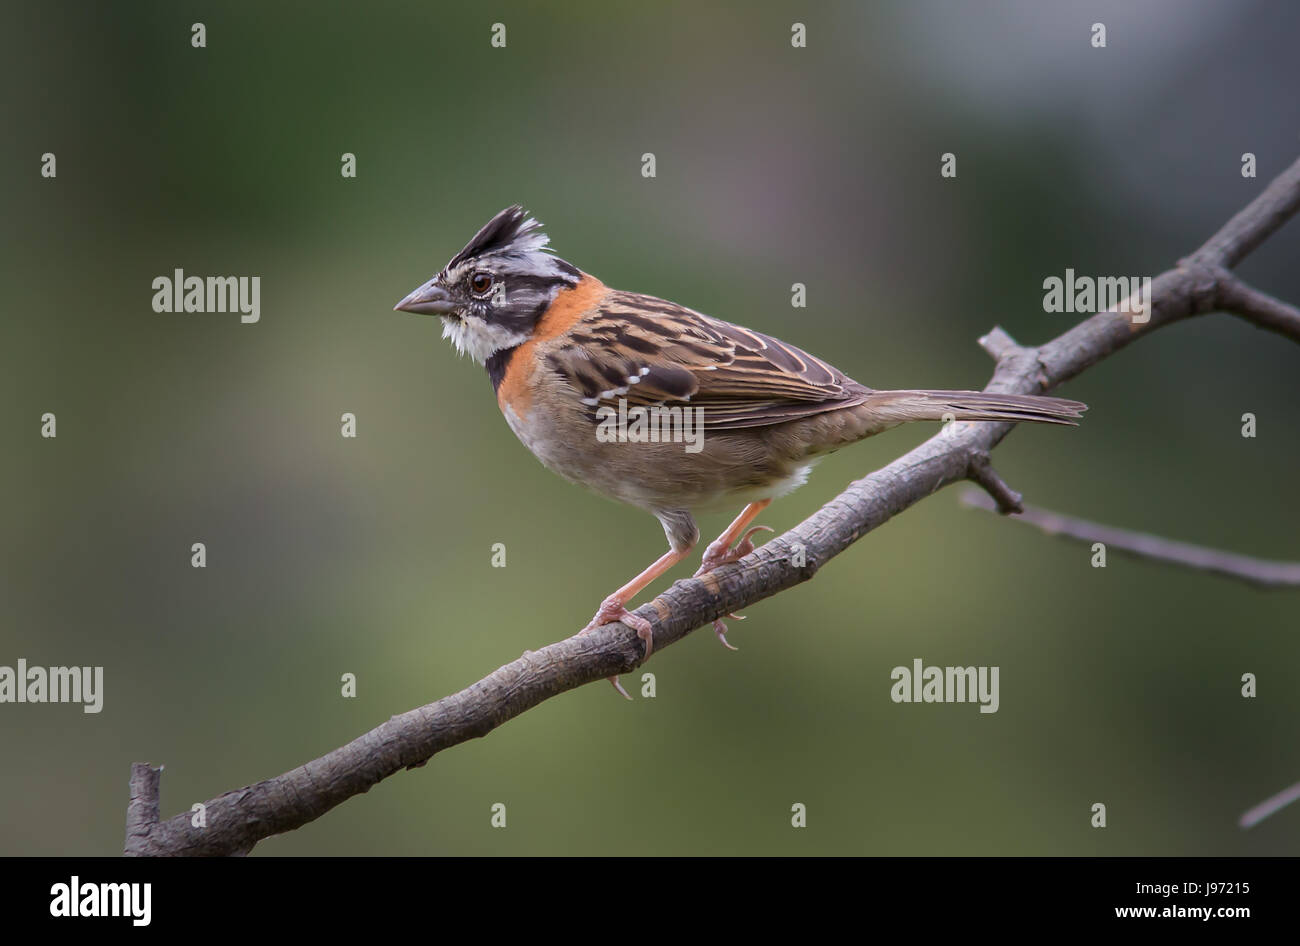 Rufous-collared Sparrow perched on a branch Stock Photo